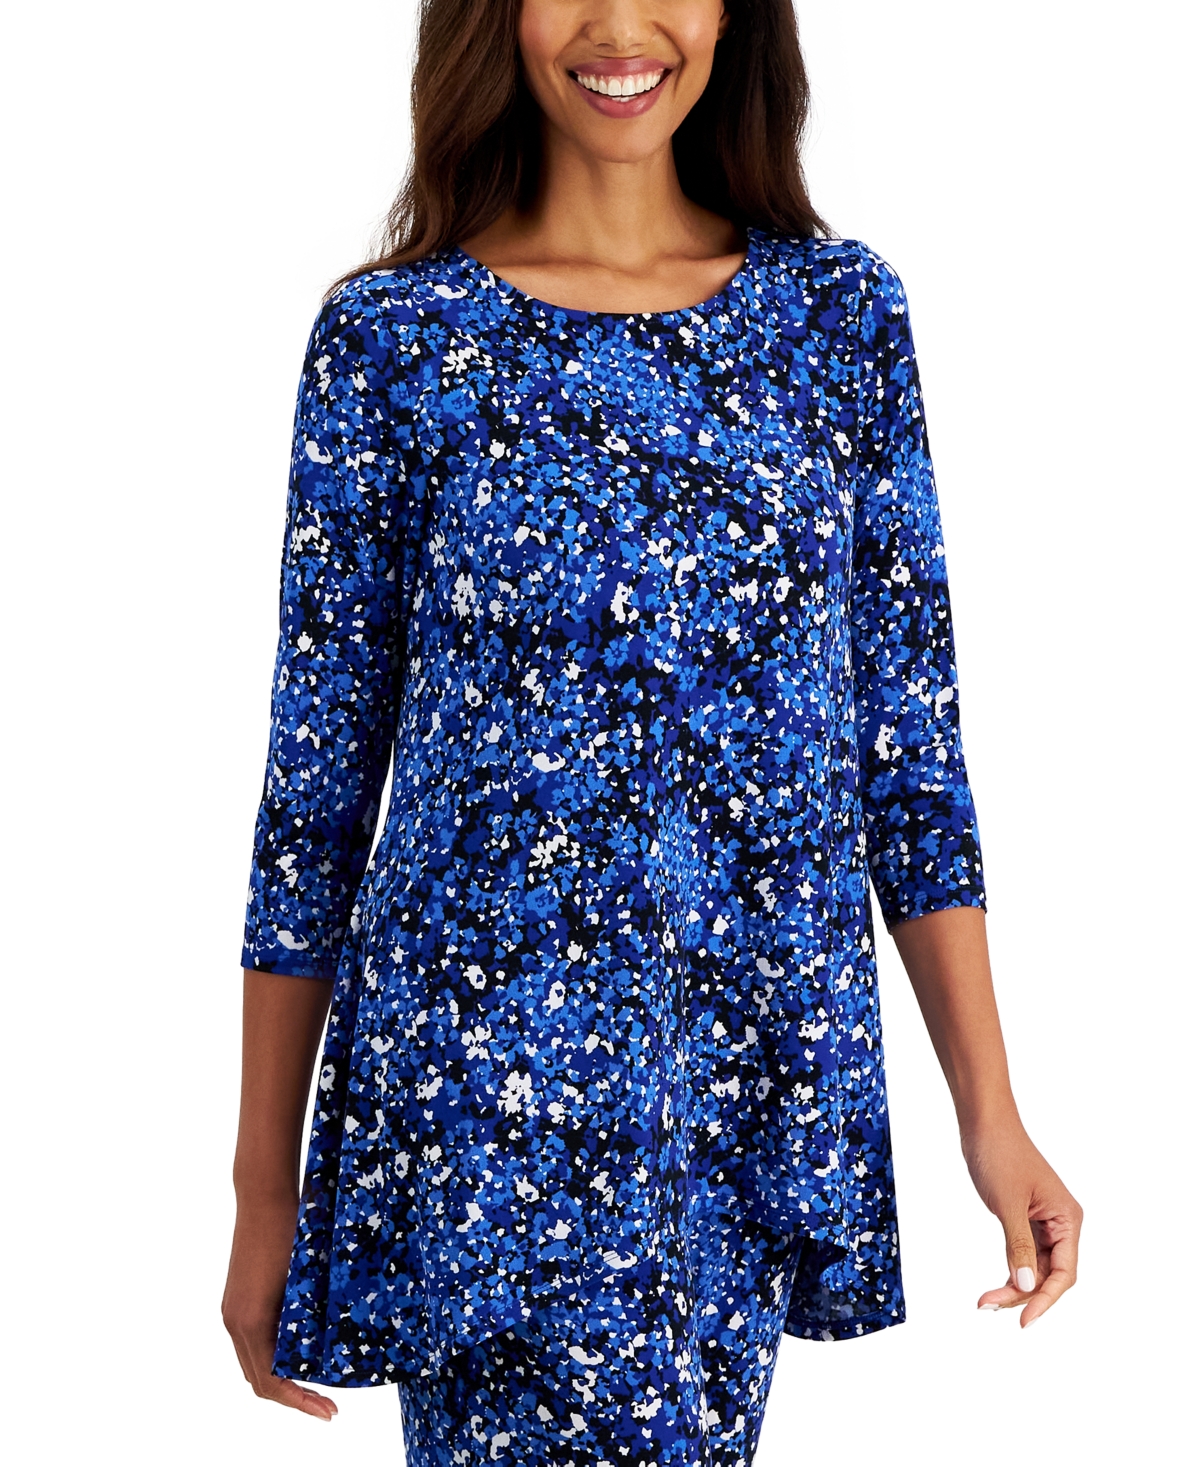 Jm Collection Women's Floral-Print 3/4-Sleeve Top, Created for